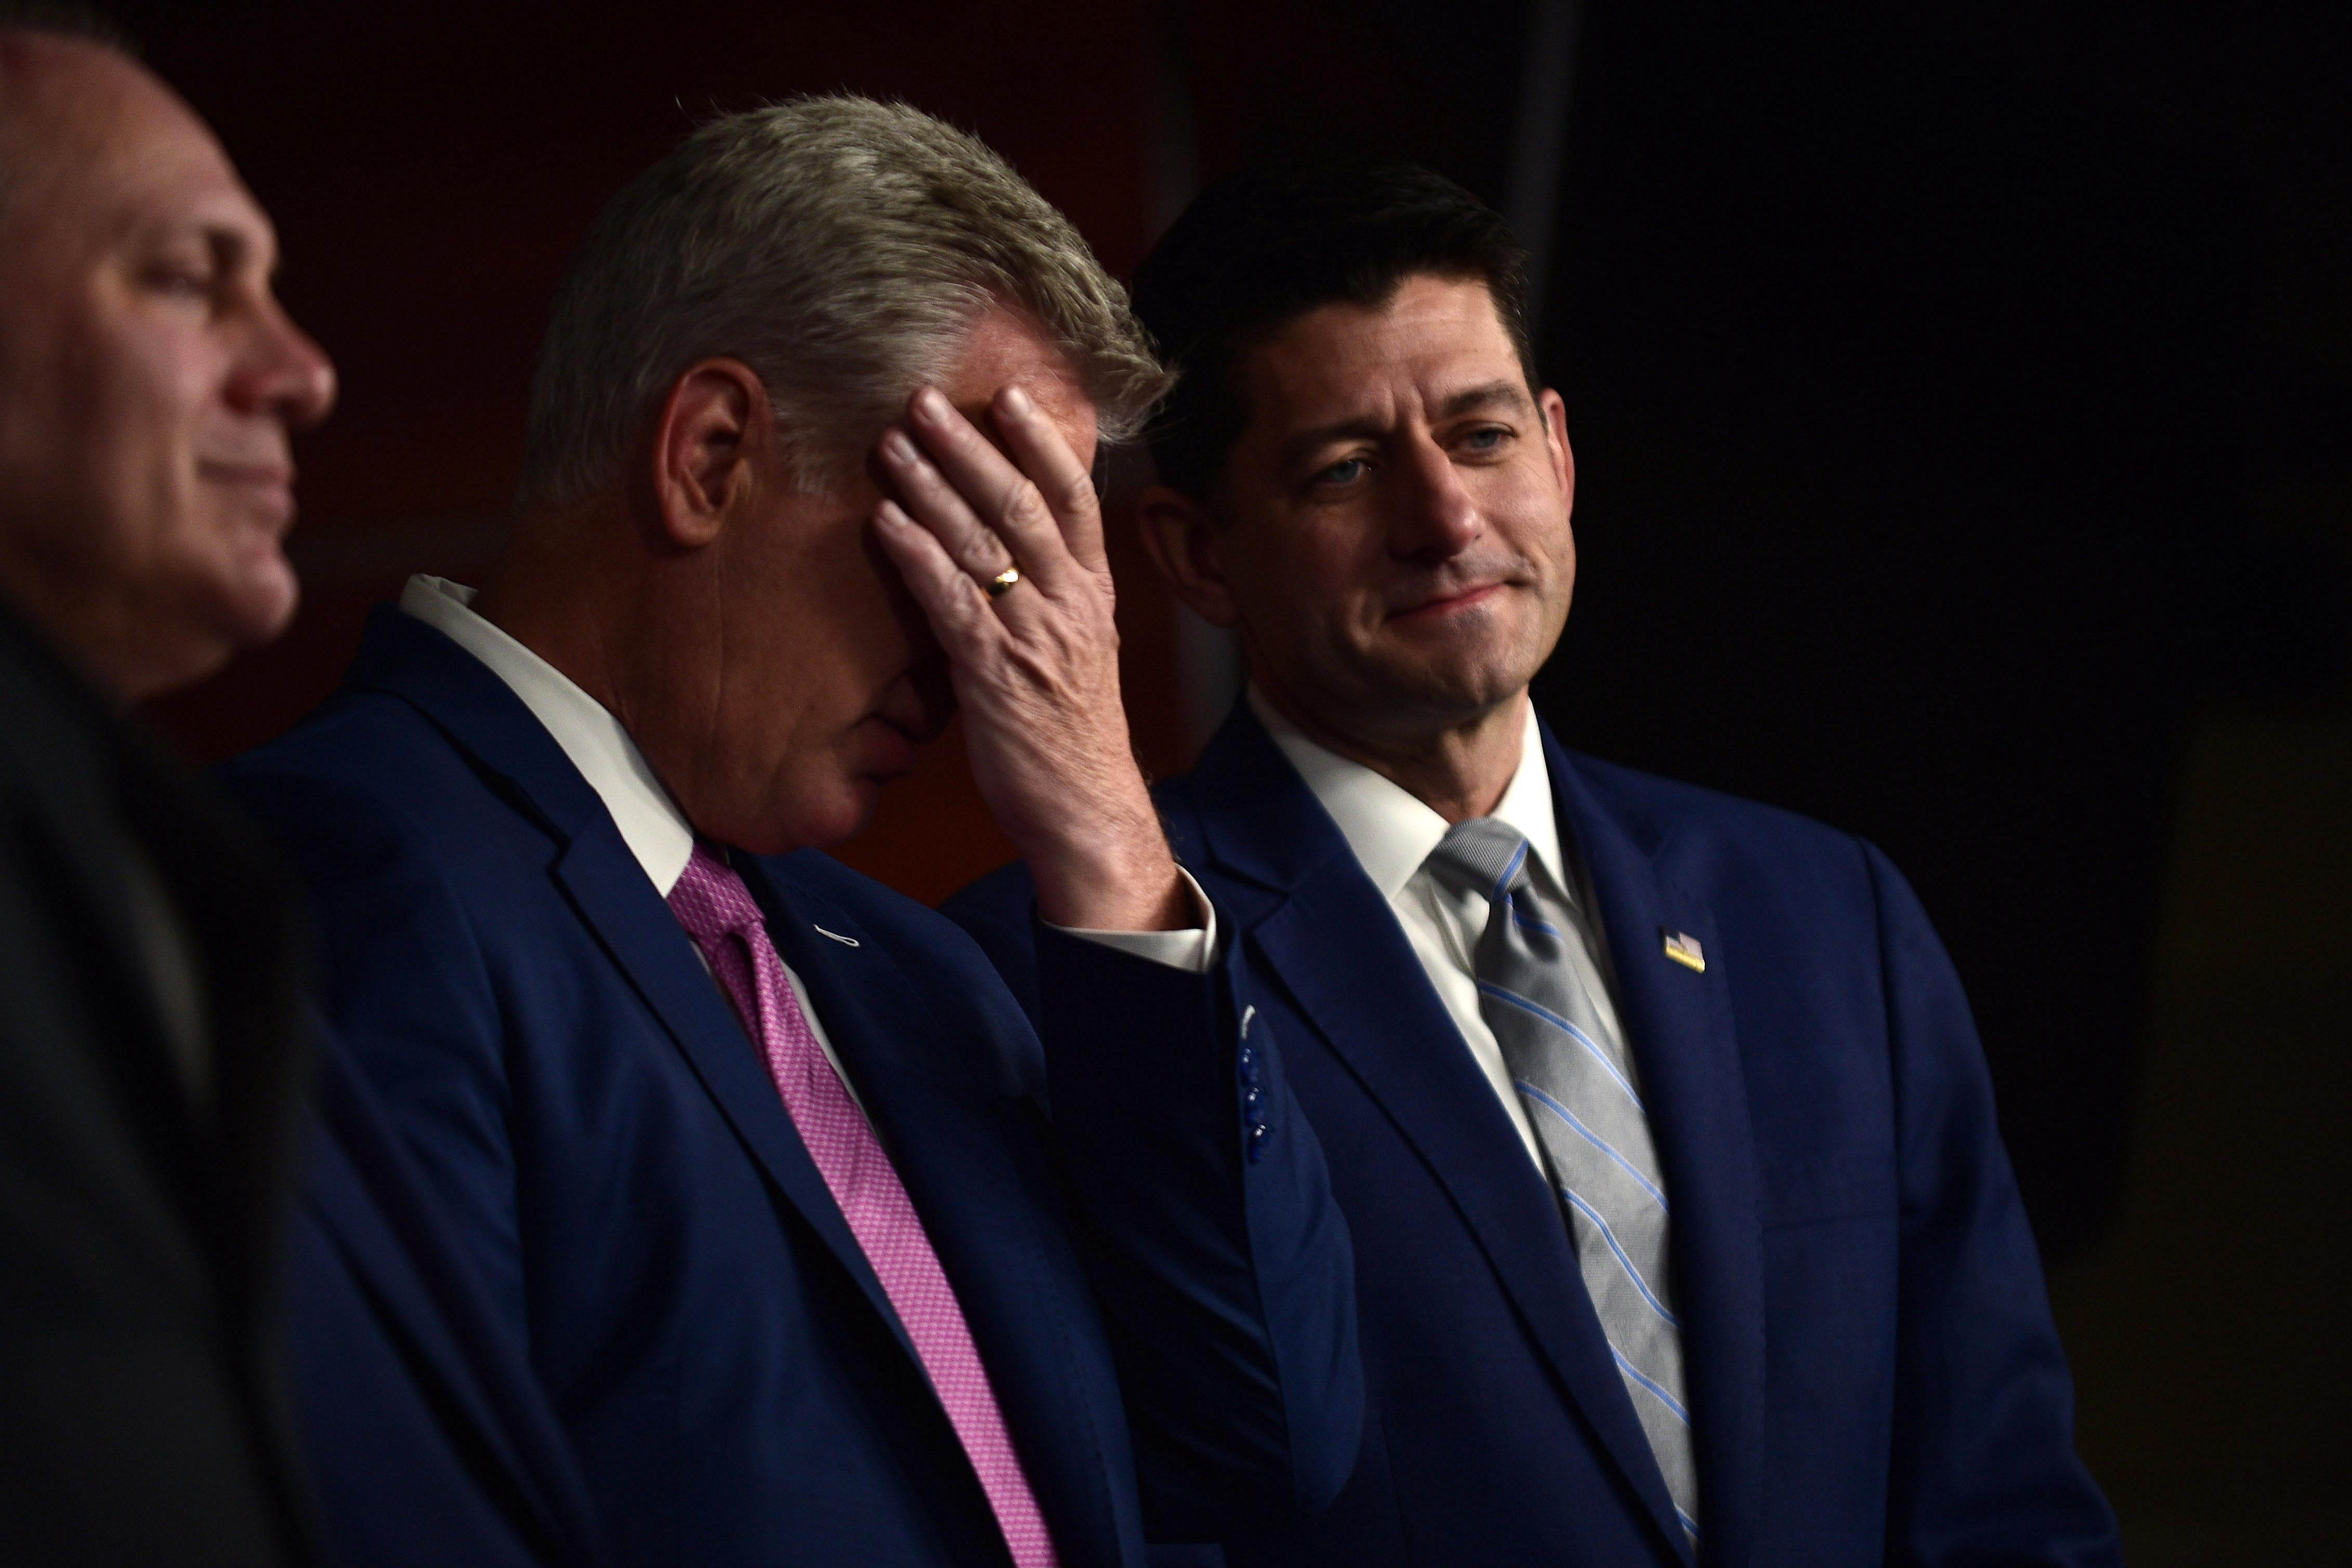 House Majority Leader Kevin Owen McCarthy, Republican Congressman for California's 23rd district, covers his face while standing next to House Speaker Paul Ryan (R-WI) during the speaker's weekly news conference at the U.S. Capitol on September 13, 2018 in Washington, D.C. 